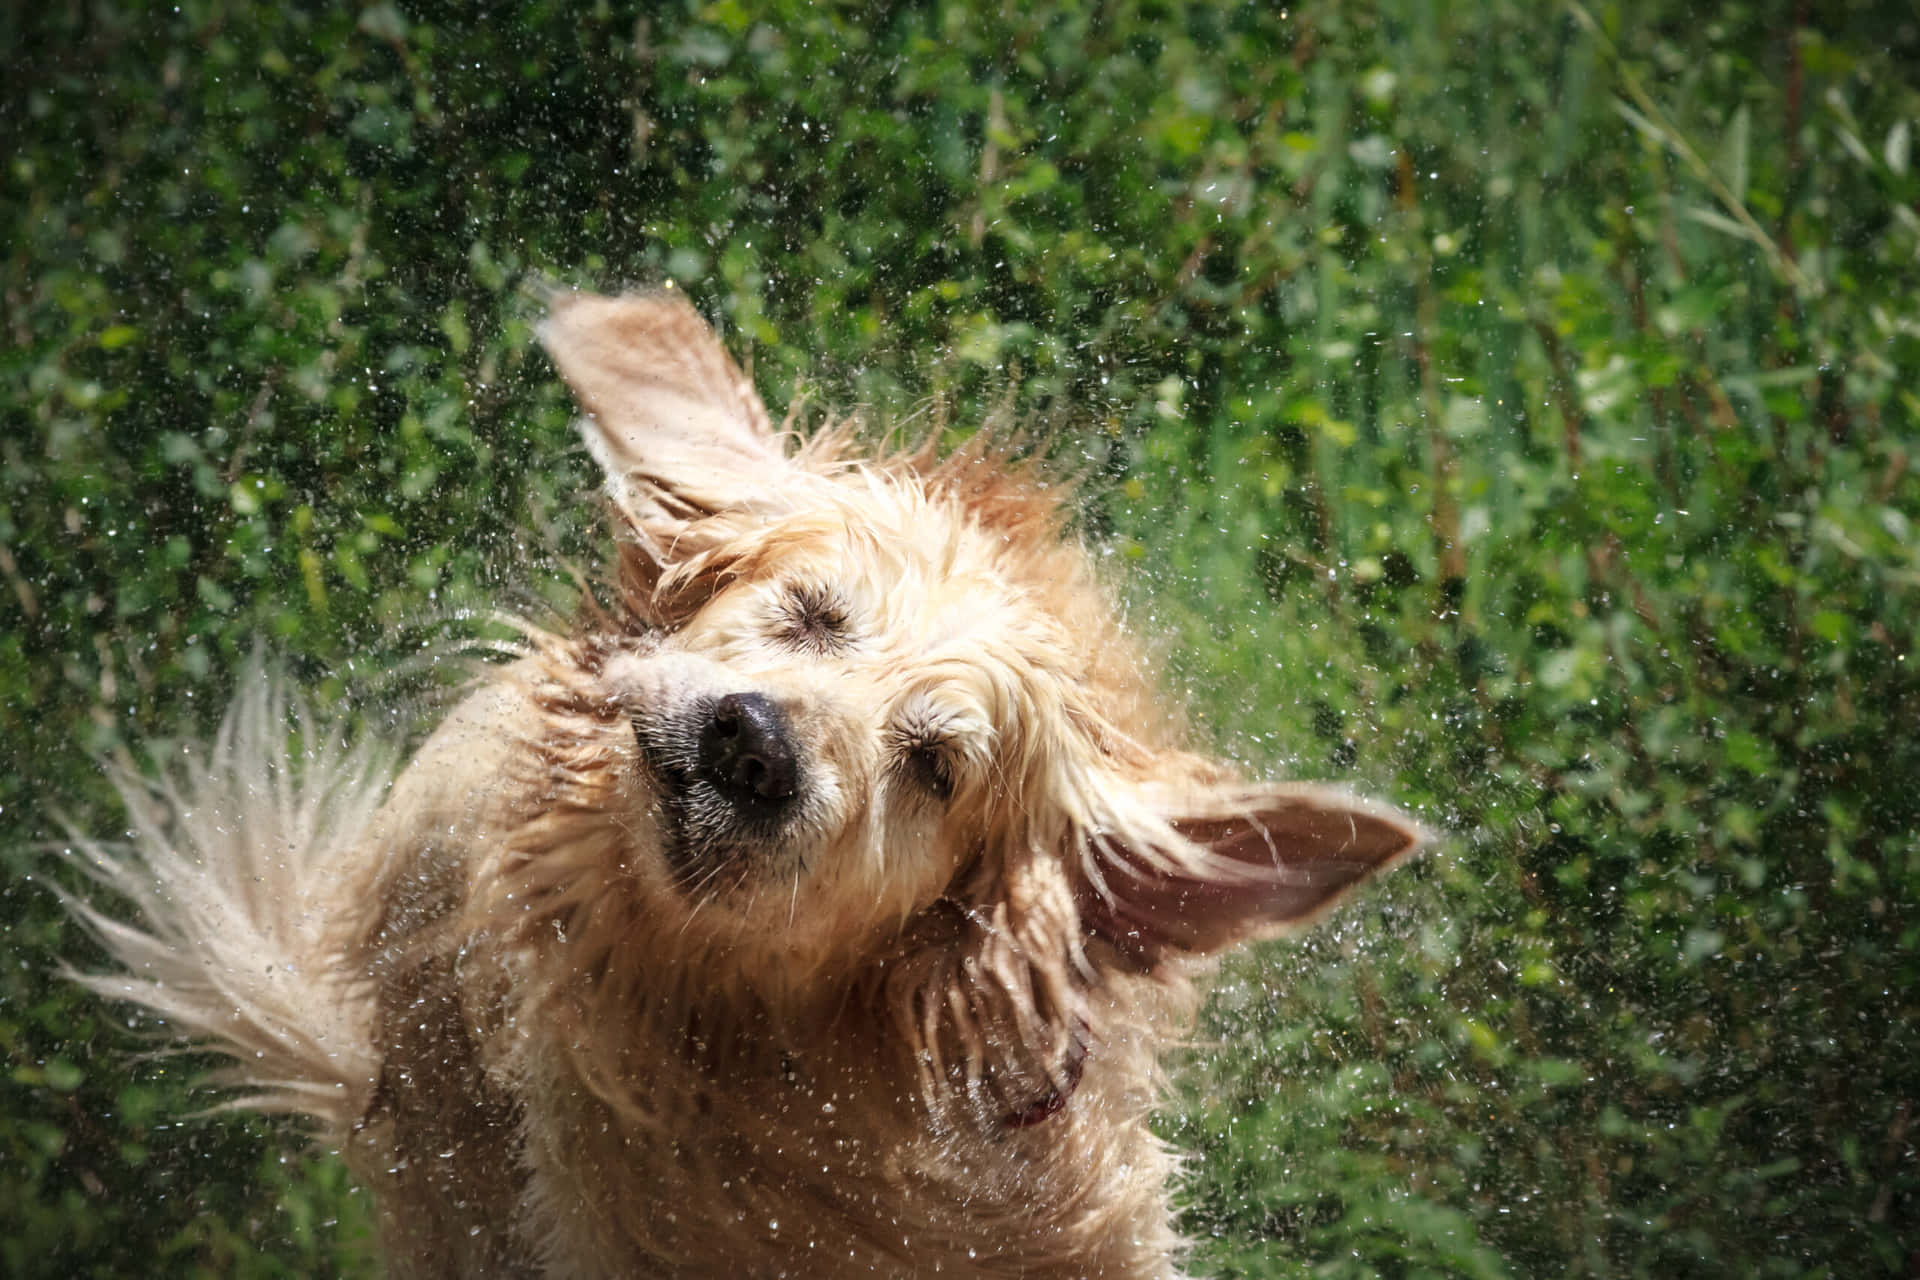 Delightful Close-up Photo Of A Wet Dog Wallpaper